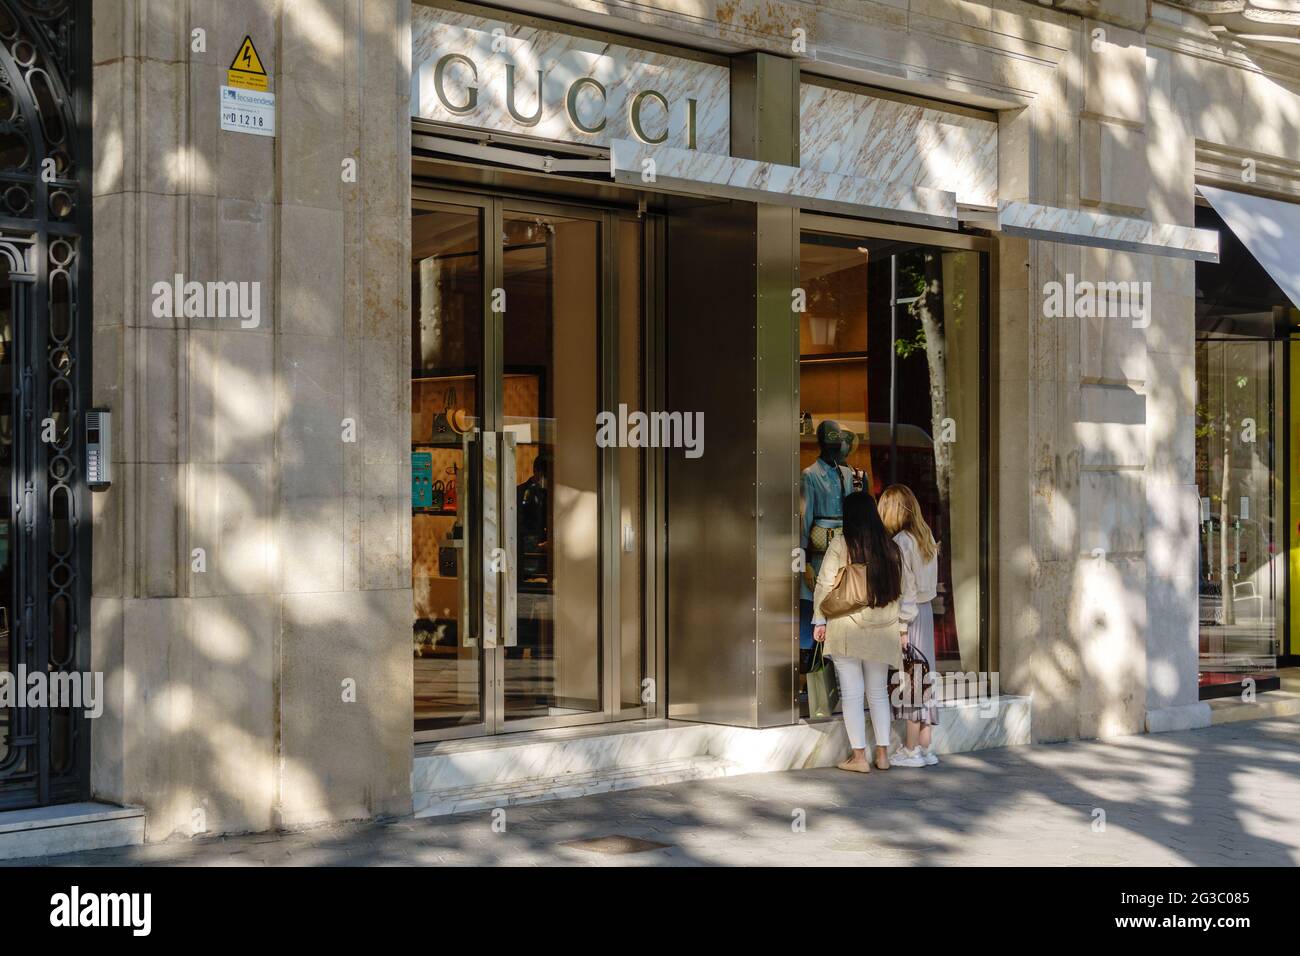 Barcelona Gucci Store Resolution Stock Photography and Images -